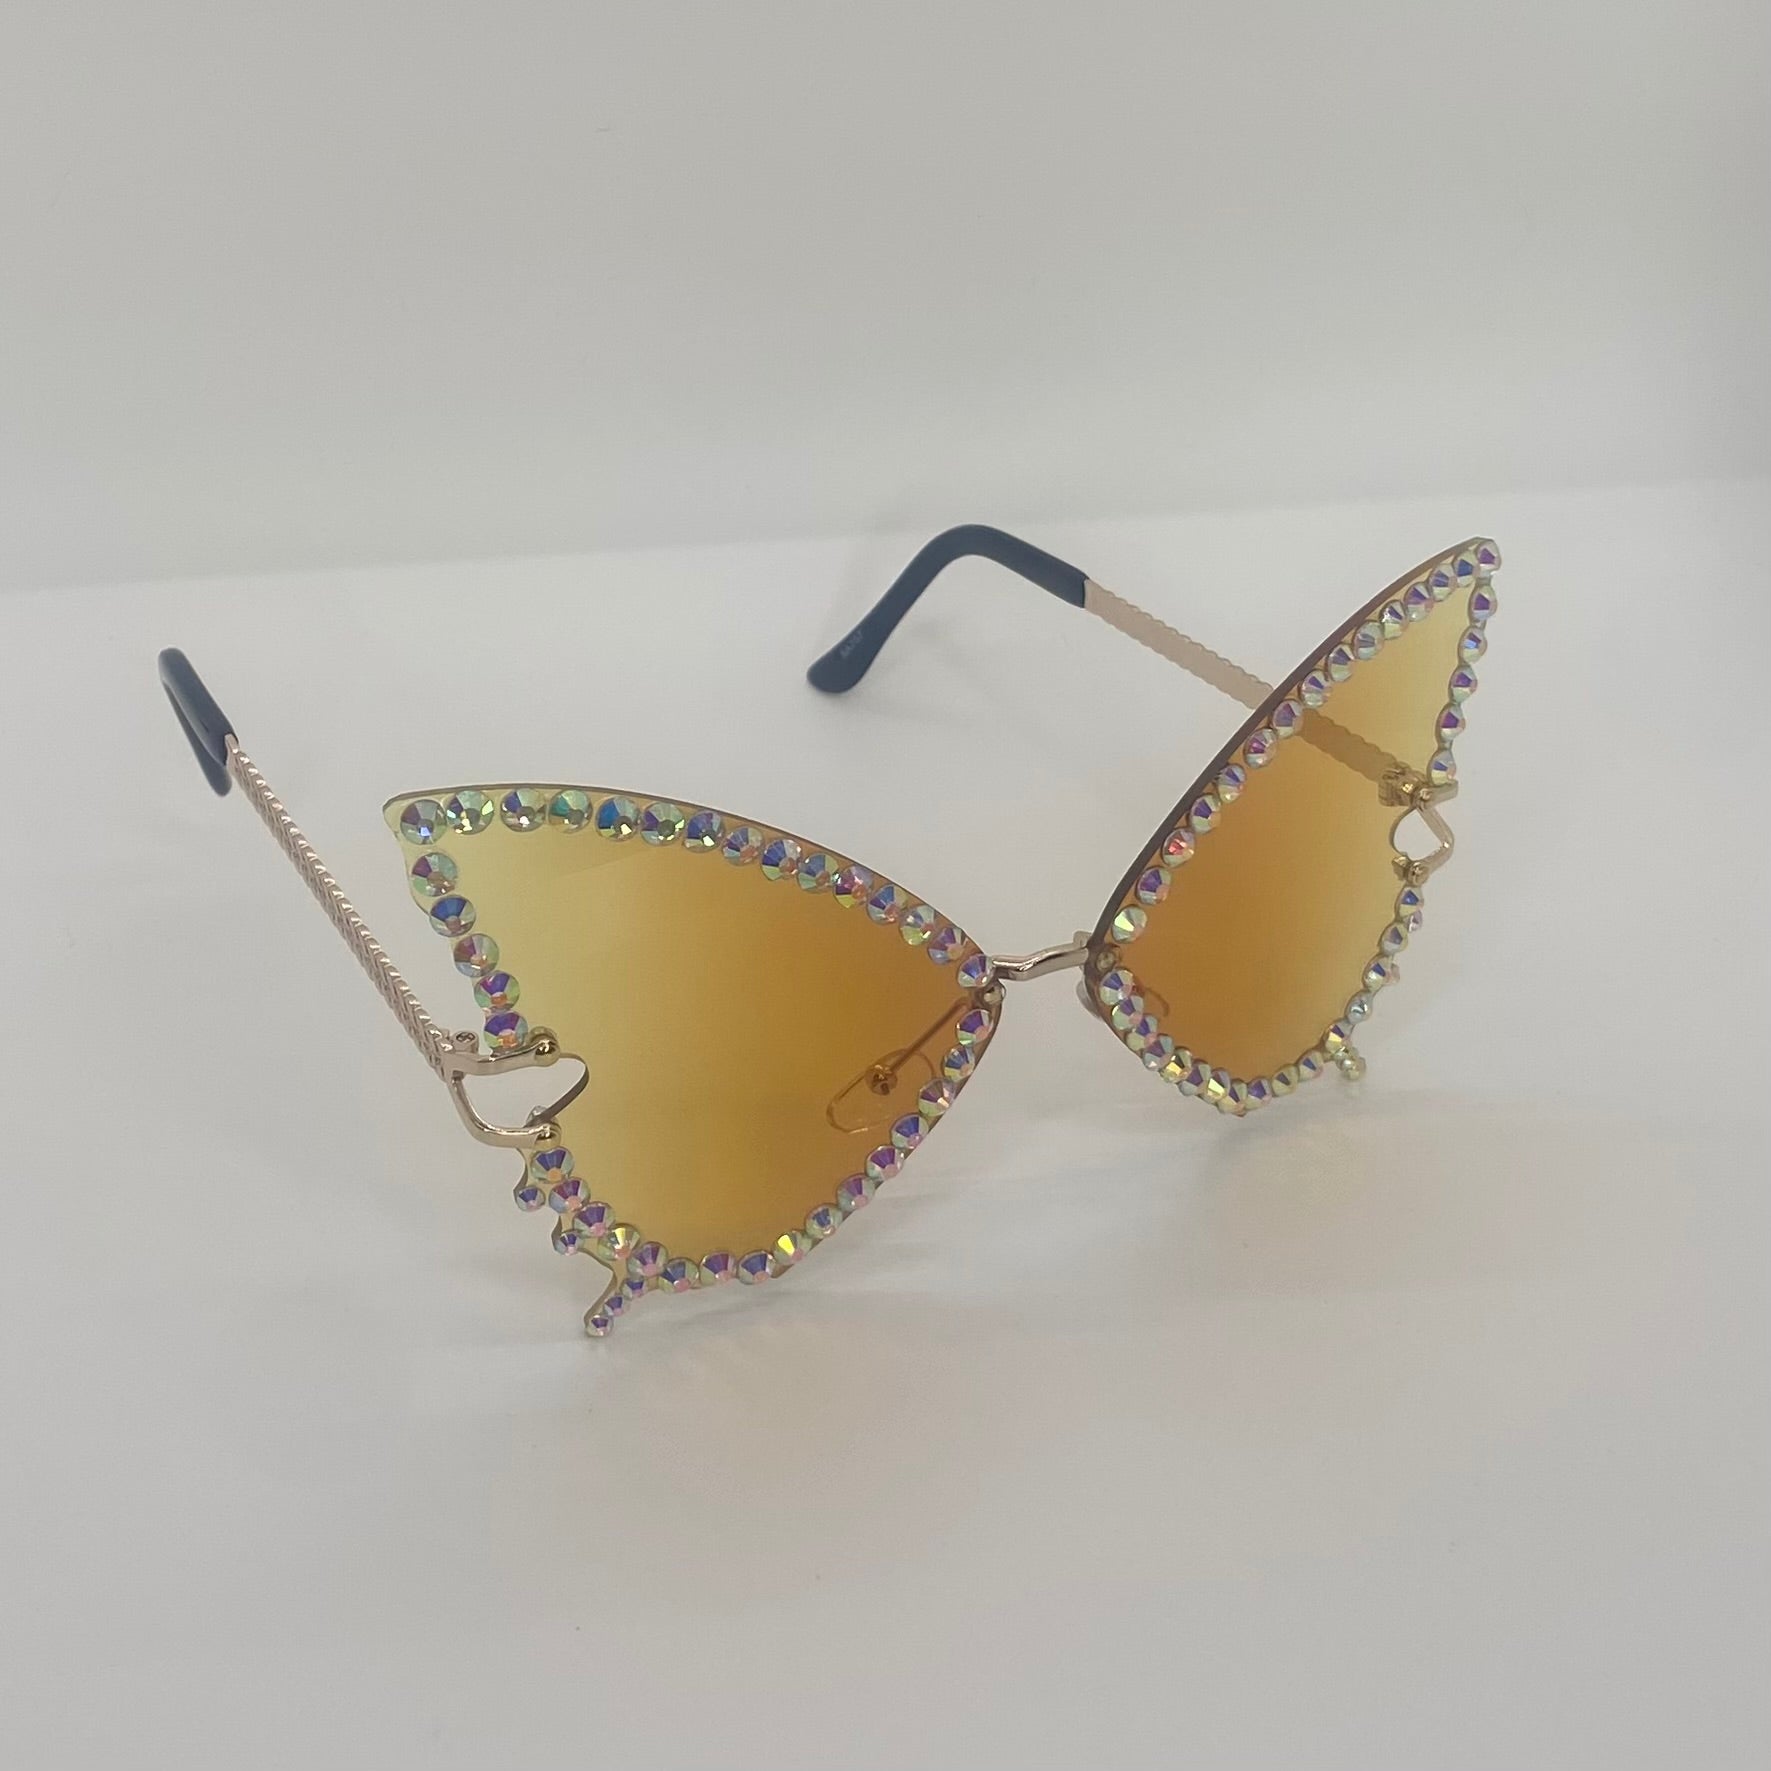 Crystal Butterfly Sunglasses